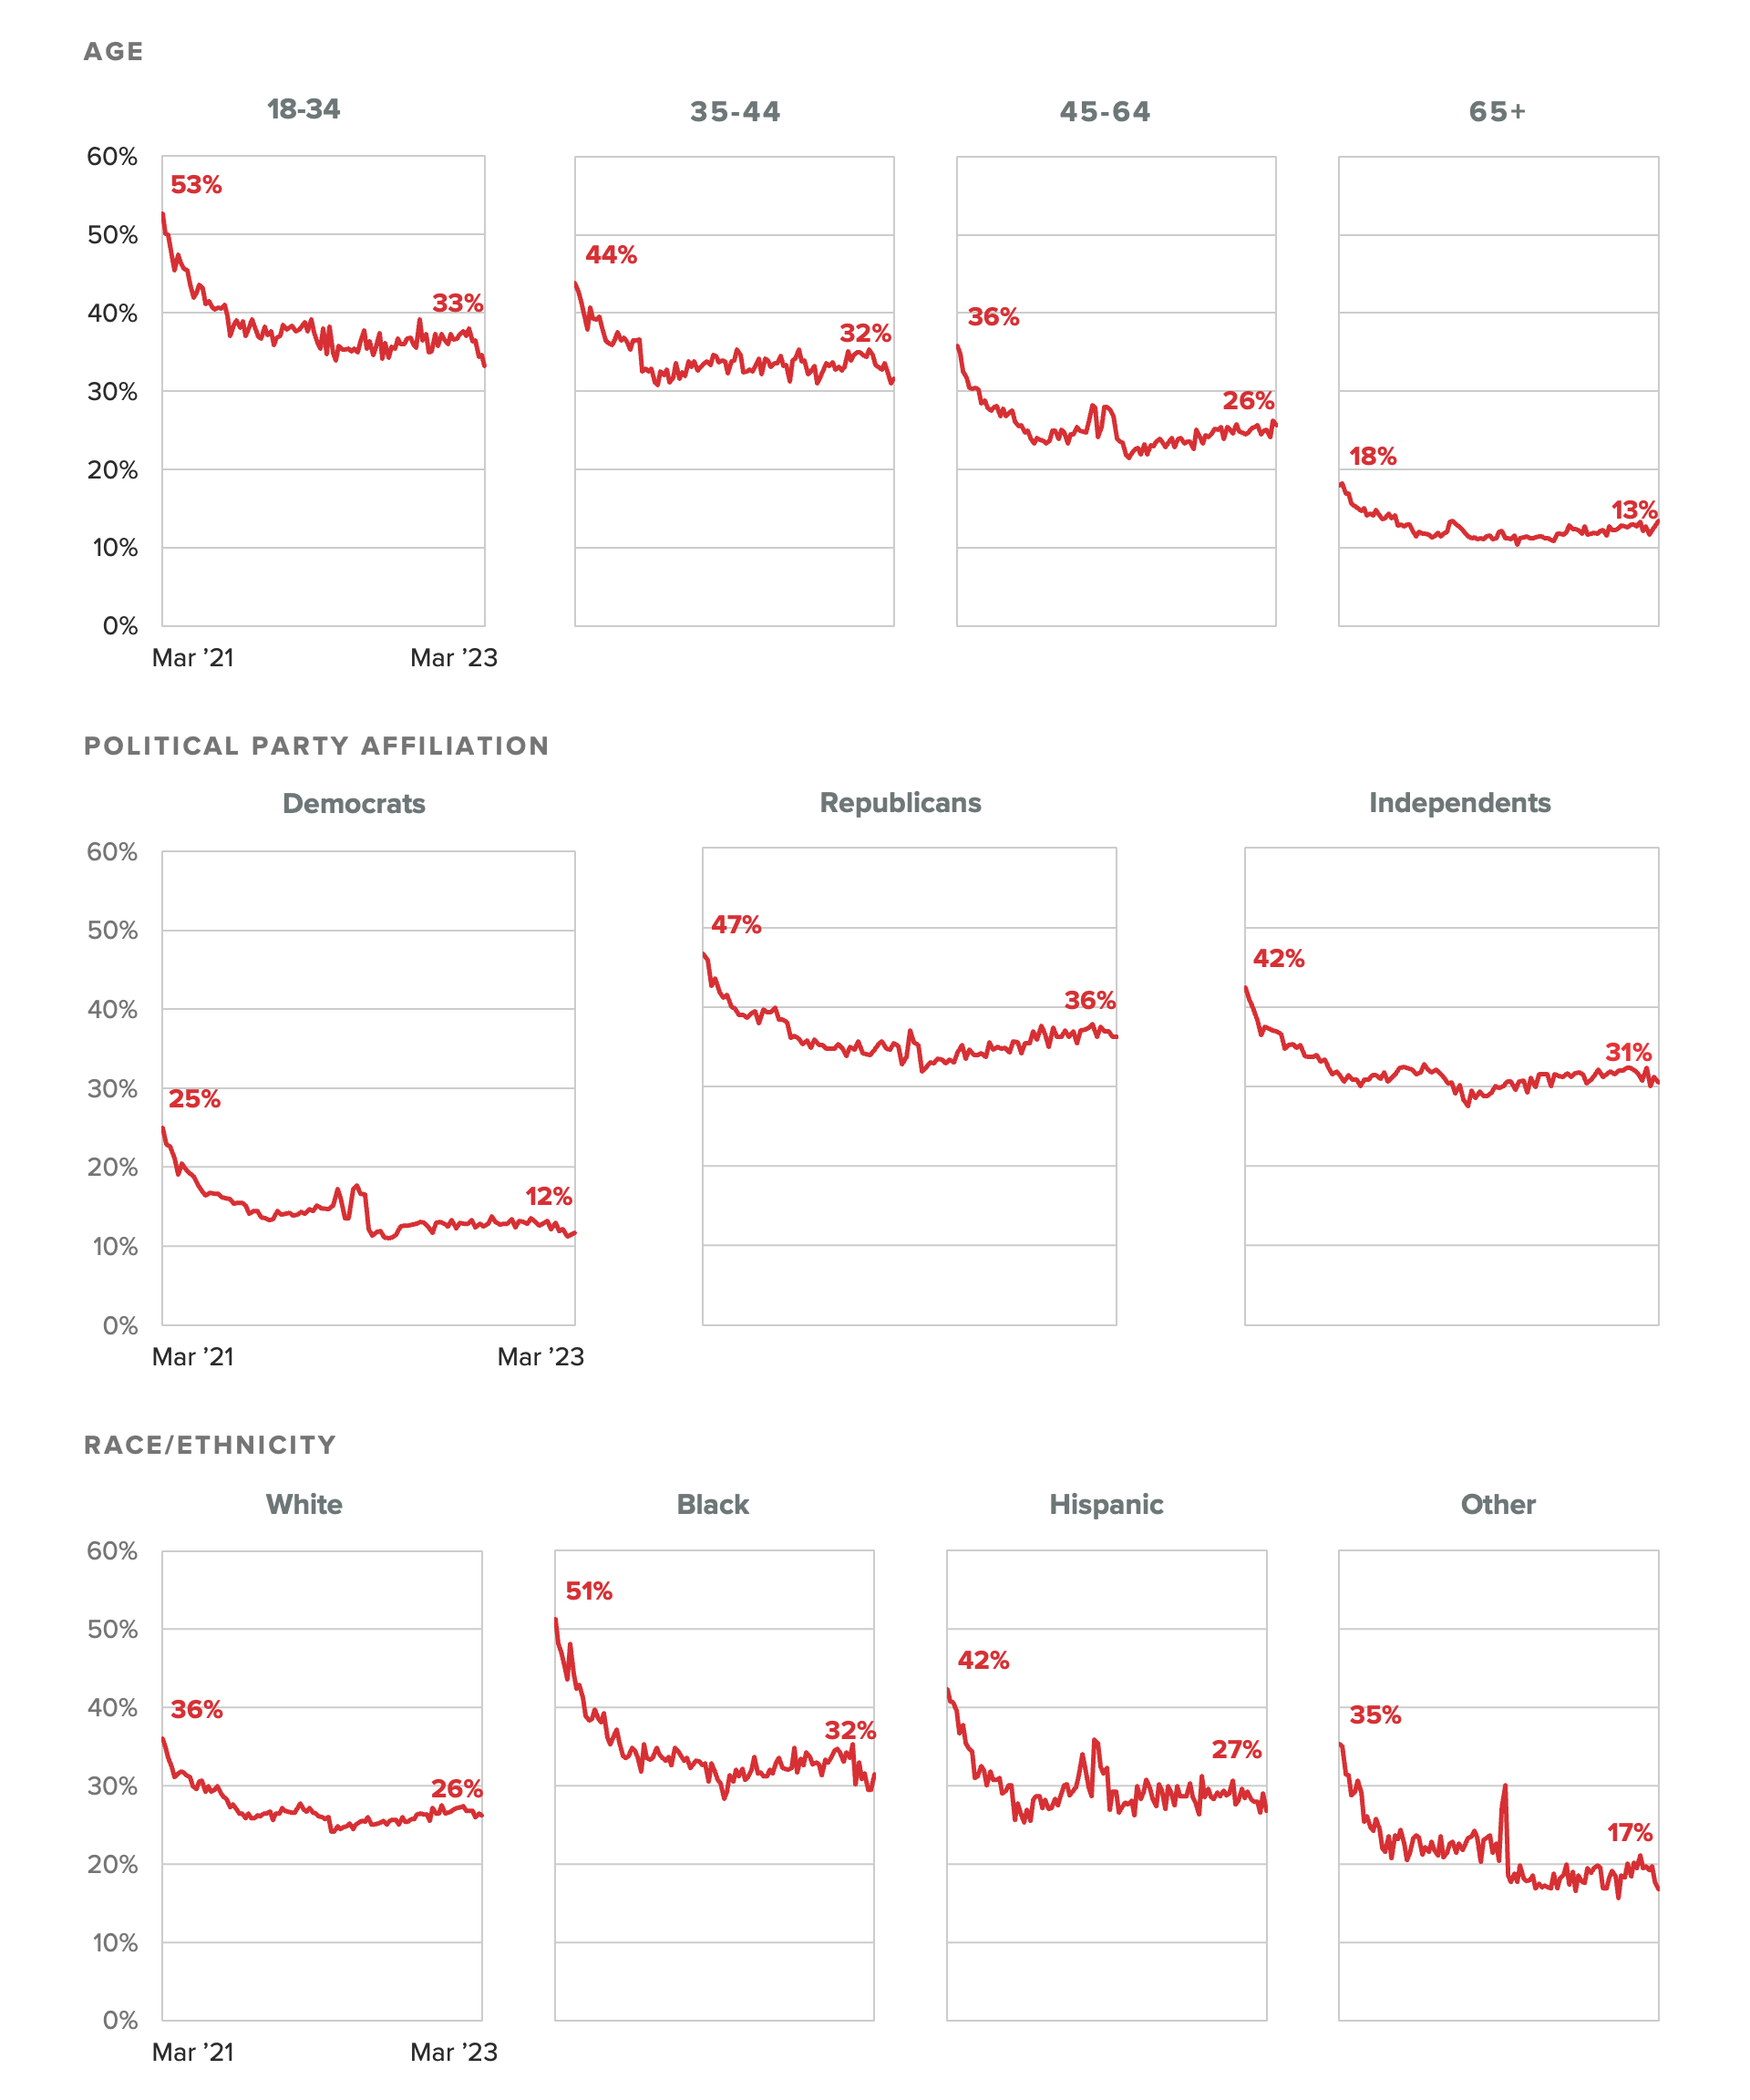 Trend lines showing vaccine skepticism over time among different demographics showing high skepticism among Republicans